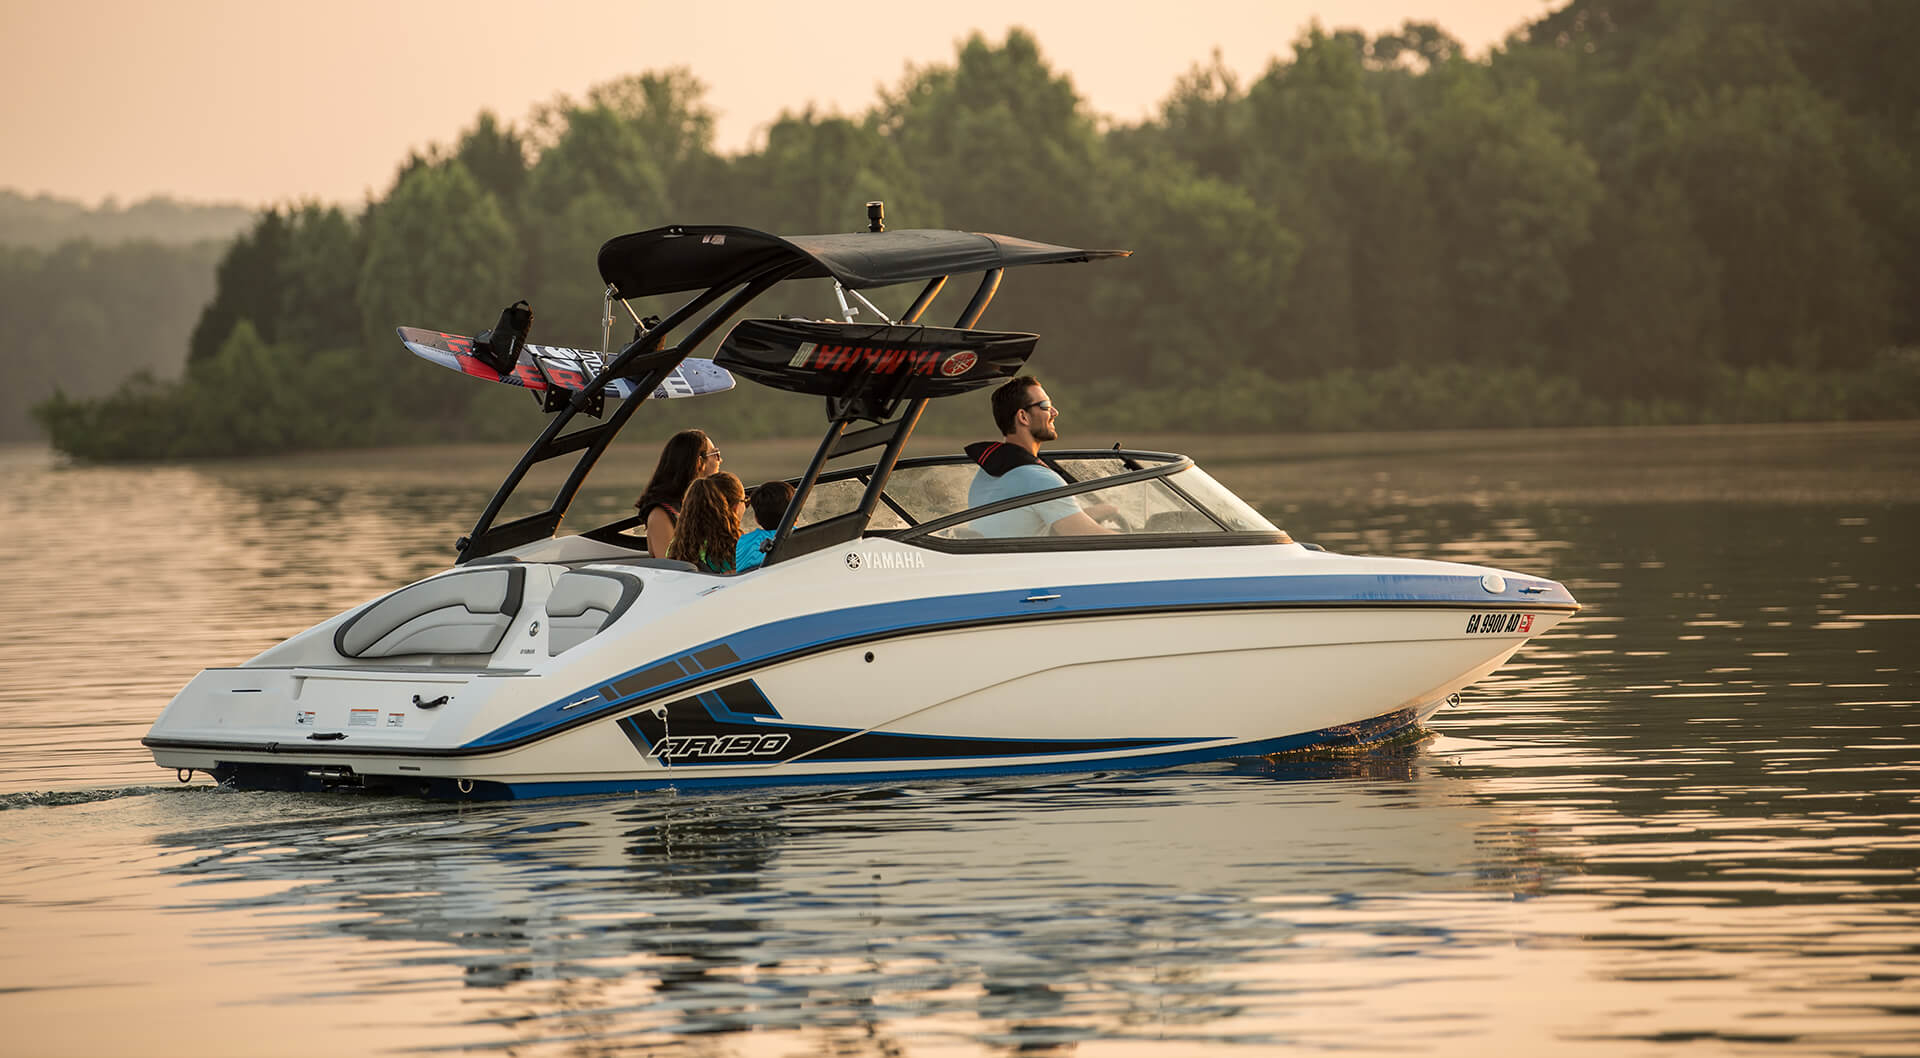 Yamaha AR190: Prices, Specs, Reviews and Sales Information - itBoat